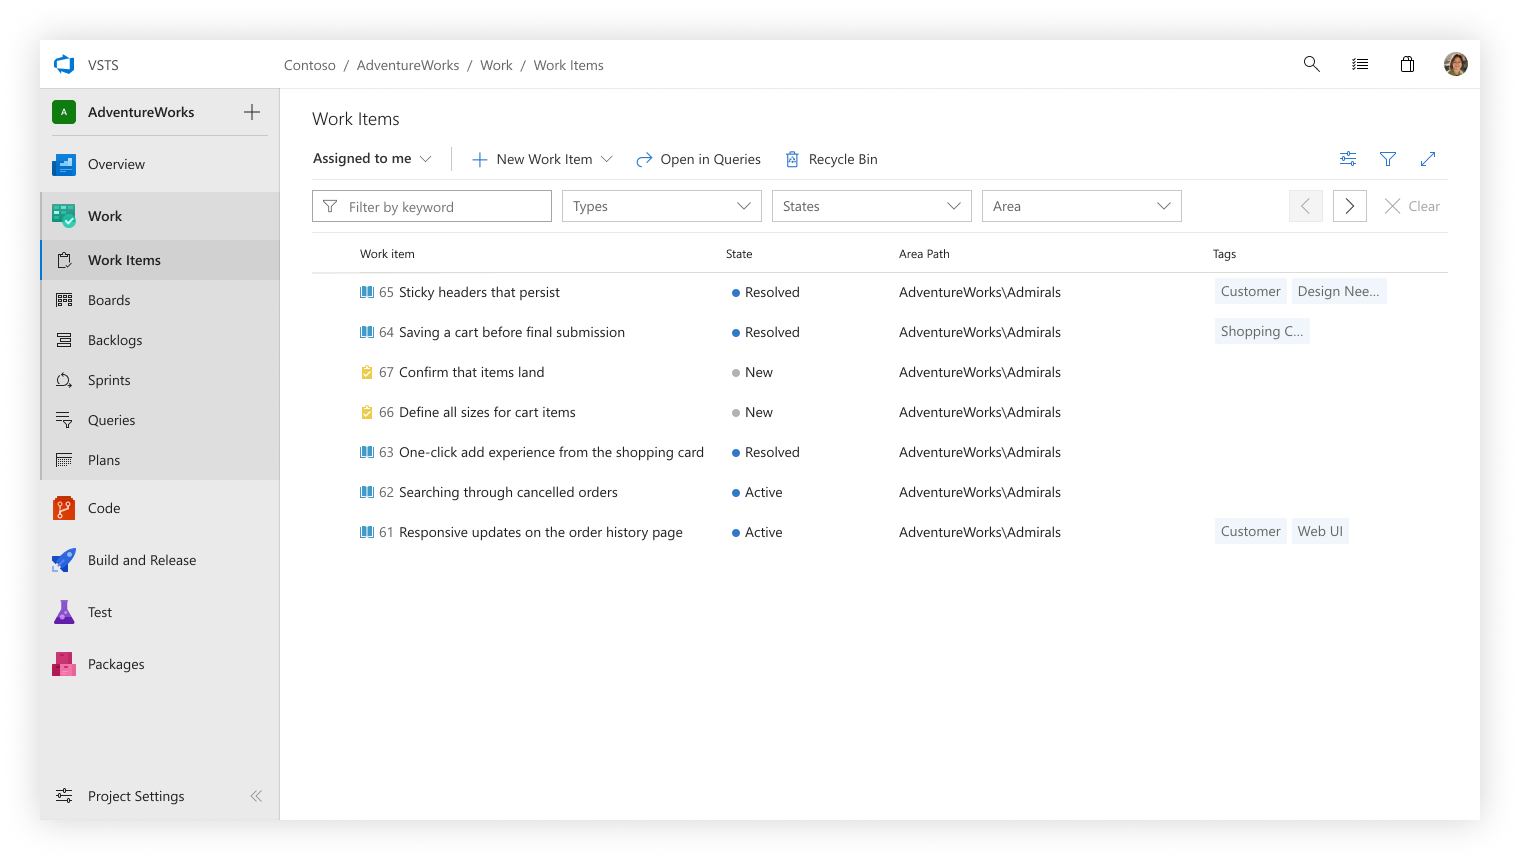 Visual Studio Team Services (VSTS) gets new look with Fluent design update